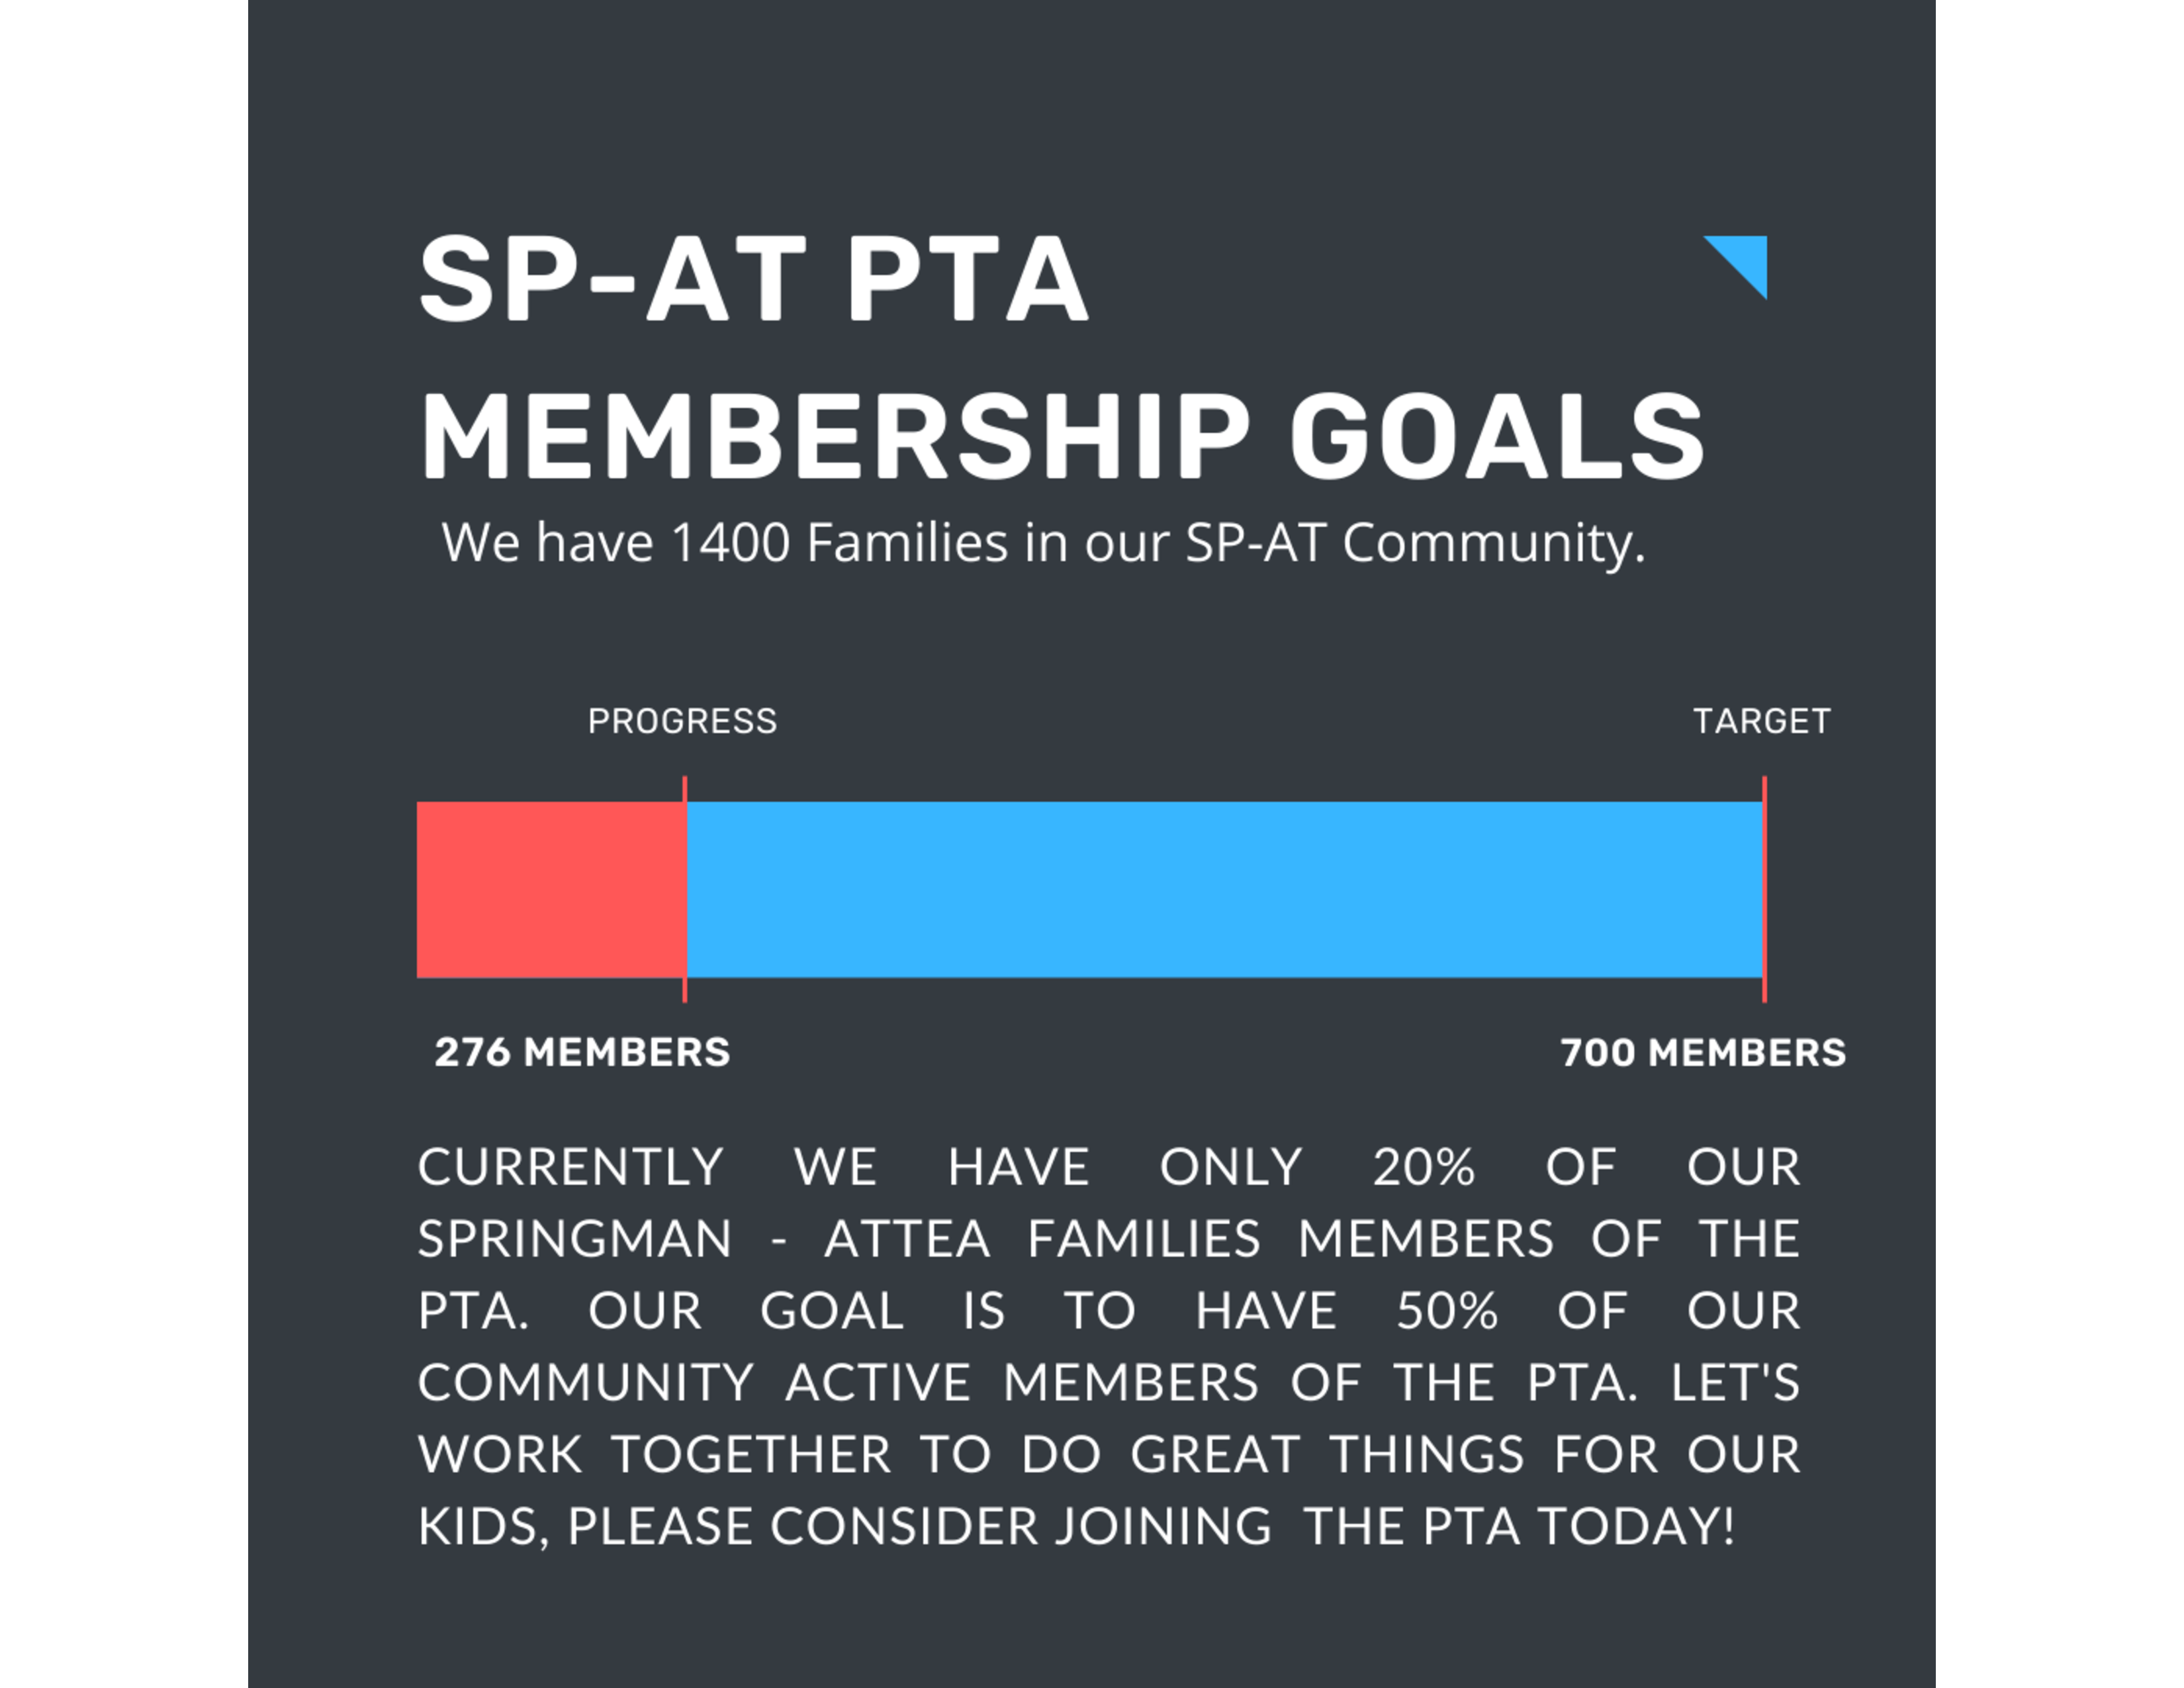 SP-AT PTA Membership Goals graphic. Only 20% of families have become members so far.